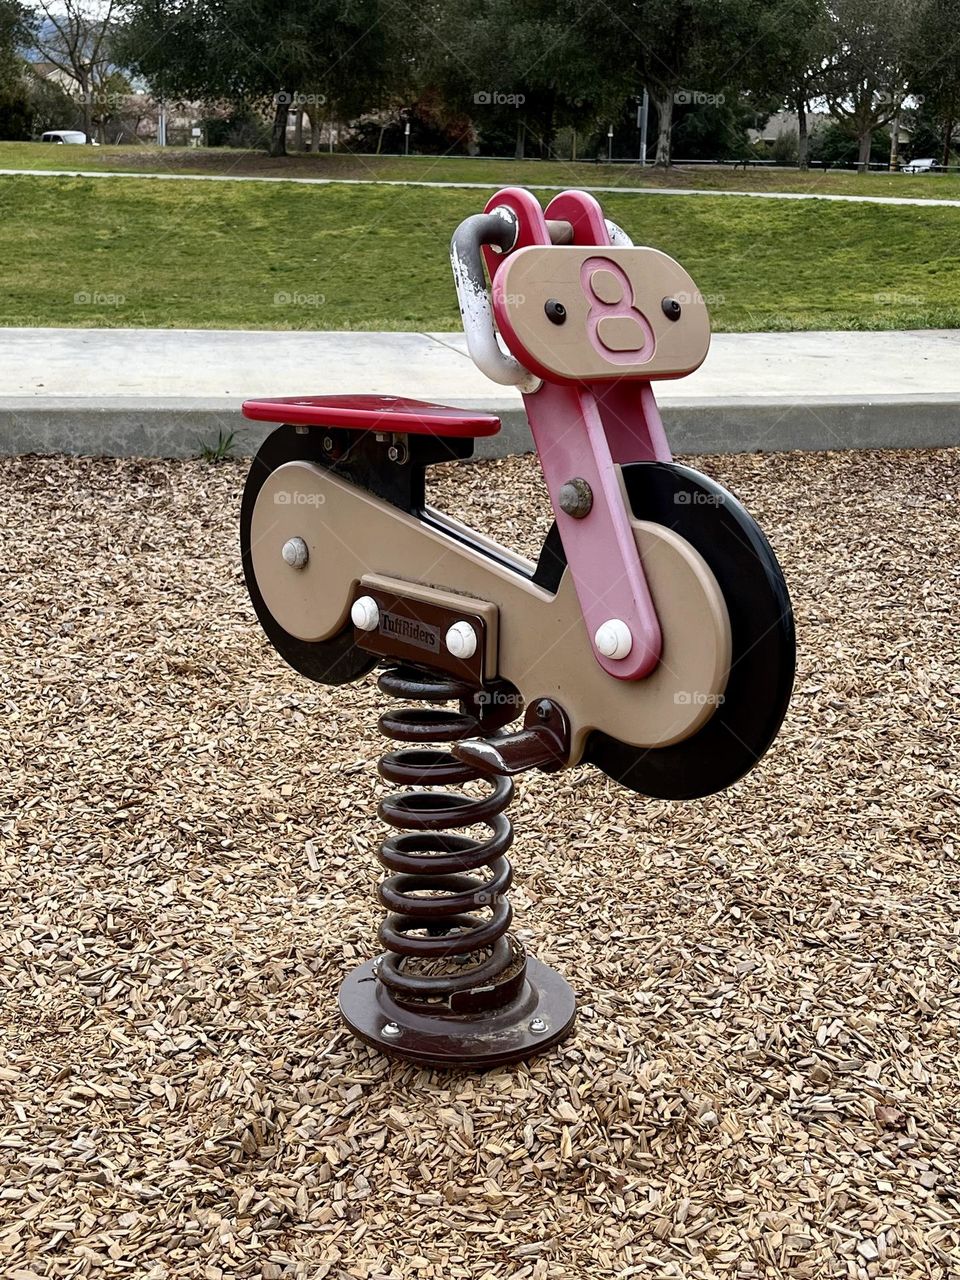 A cute red Children’s bouncy bike ride in a public park.  It’s sitting in the tan bark from the playground with the sidewalk and a green grassy field behind it.  Fun for kids